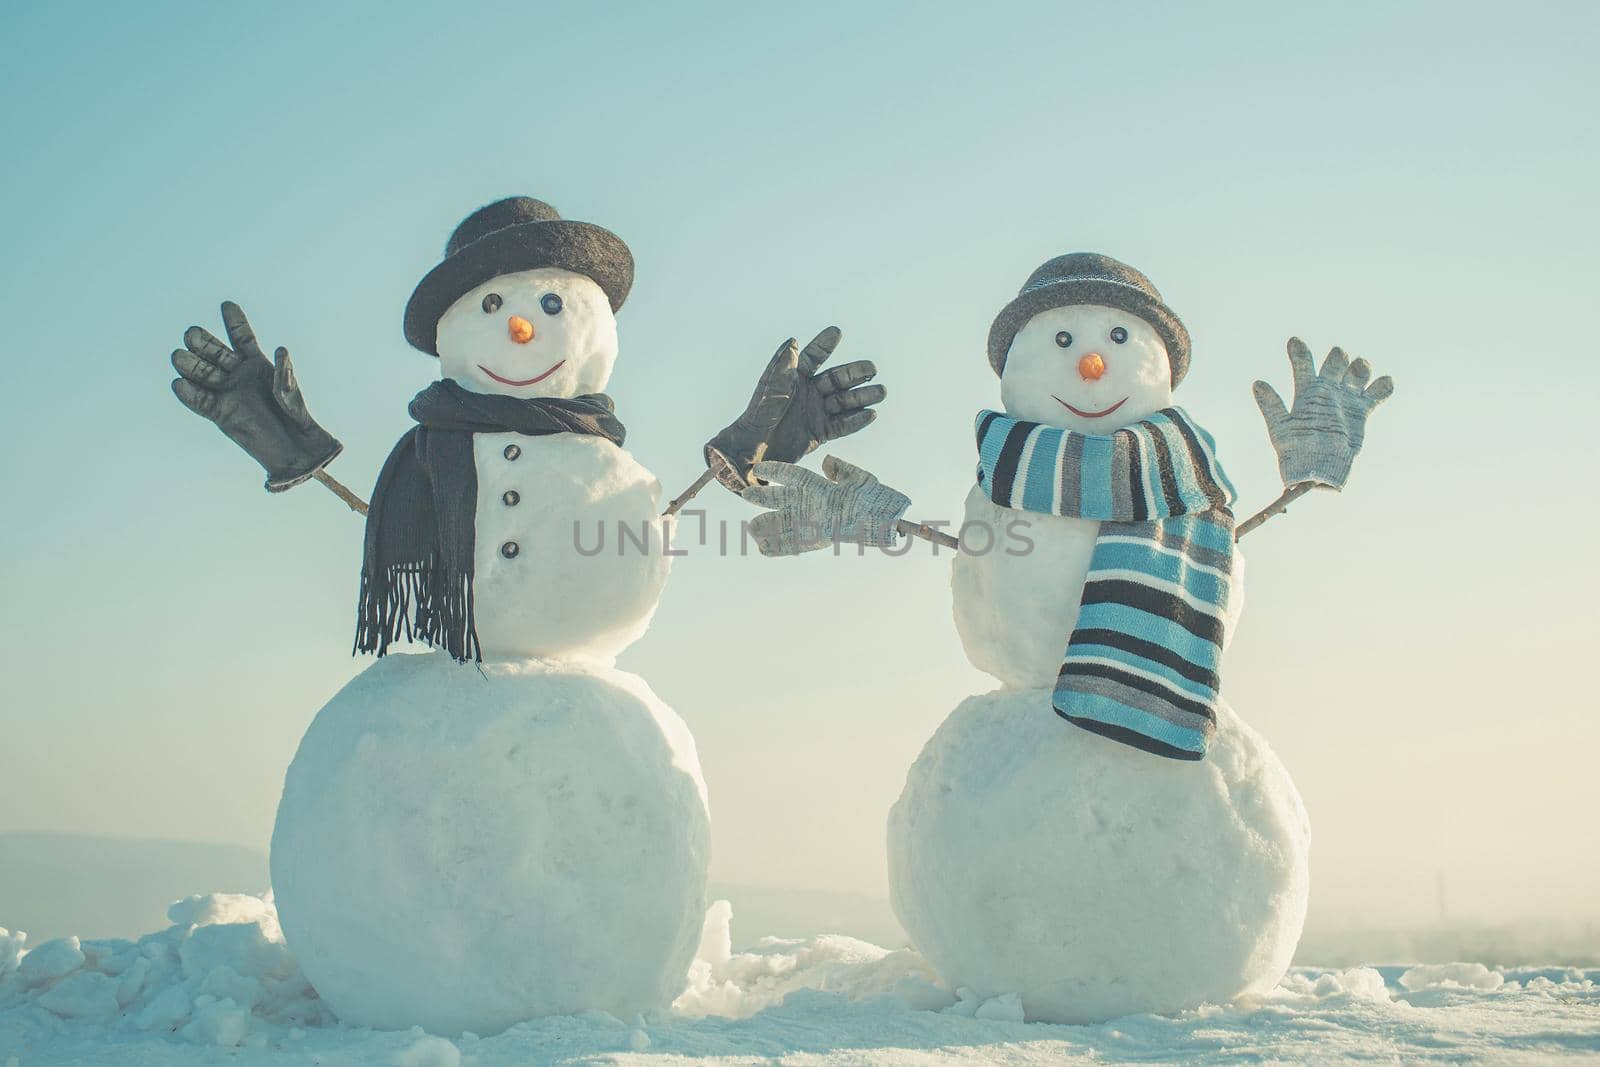 Snowman with hat and scarf in winter outdoor. Happy winter holiday card